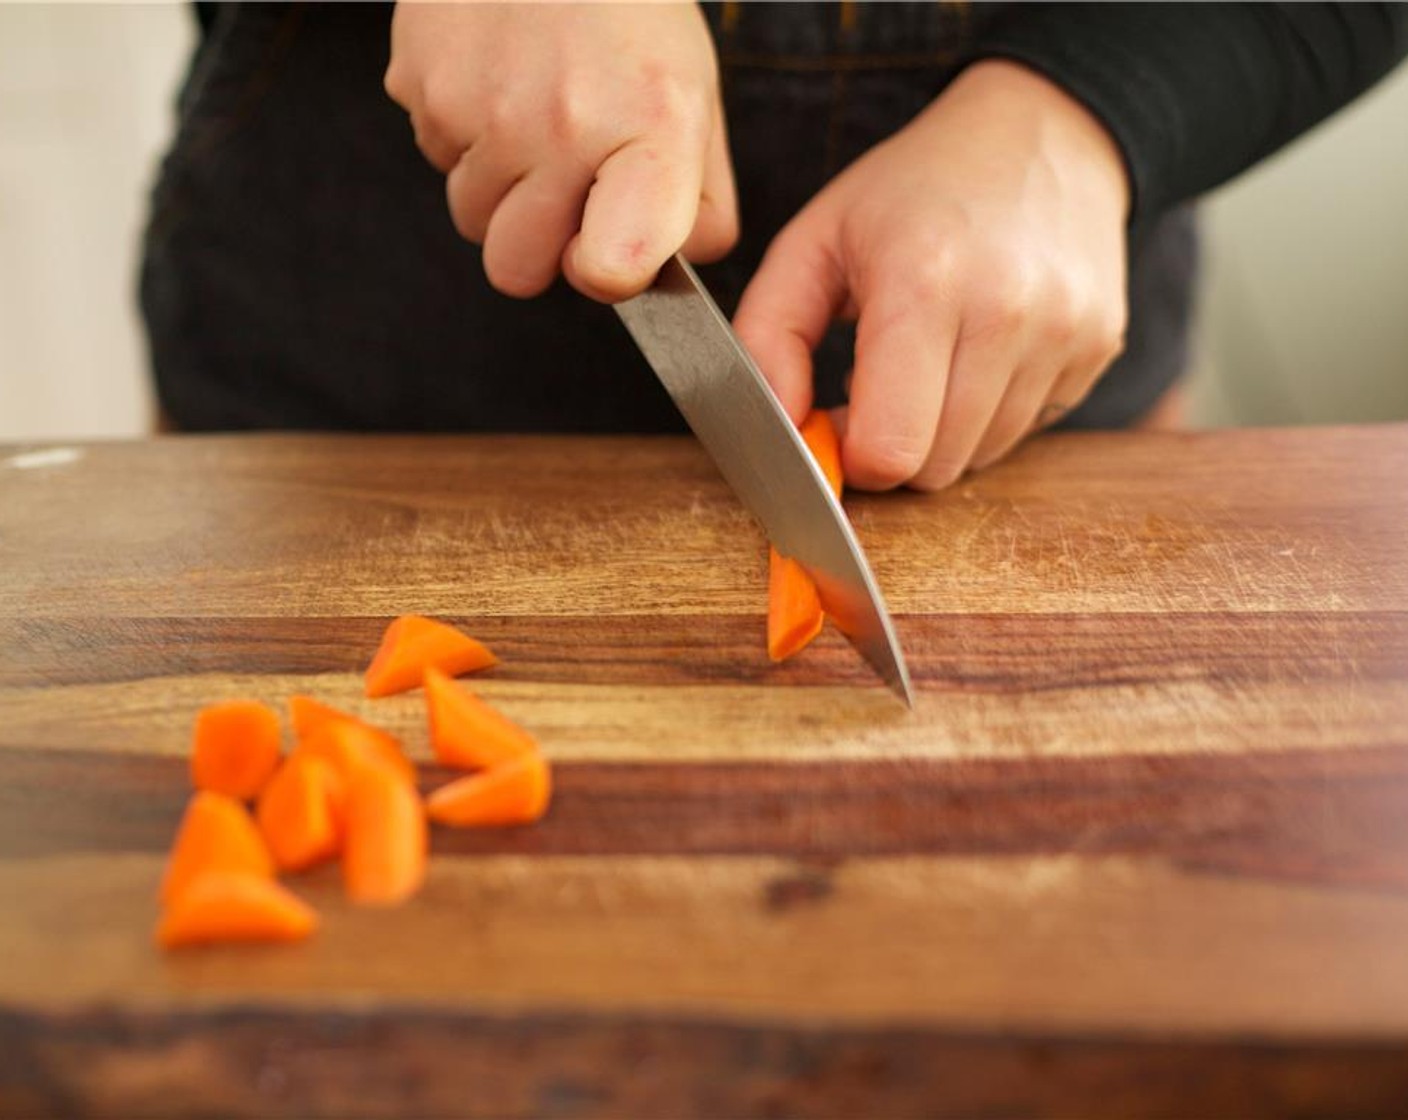 step 6 Peel and slice the Carrot (1) into one inch pieces by cutting across and then slice on the bias. Repeat this process for the whole carrot. This is called a roll cut. Set carrot aside.